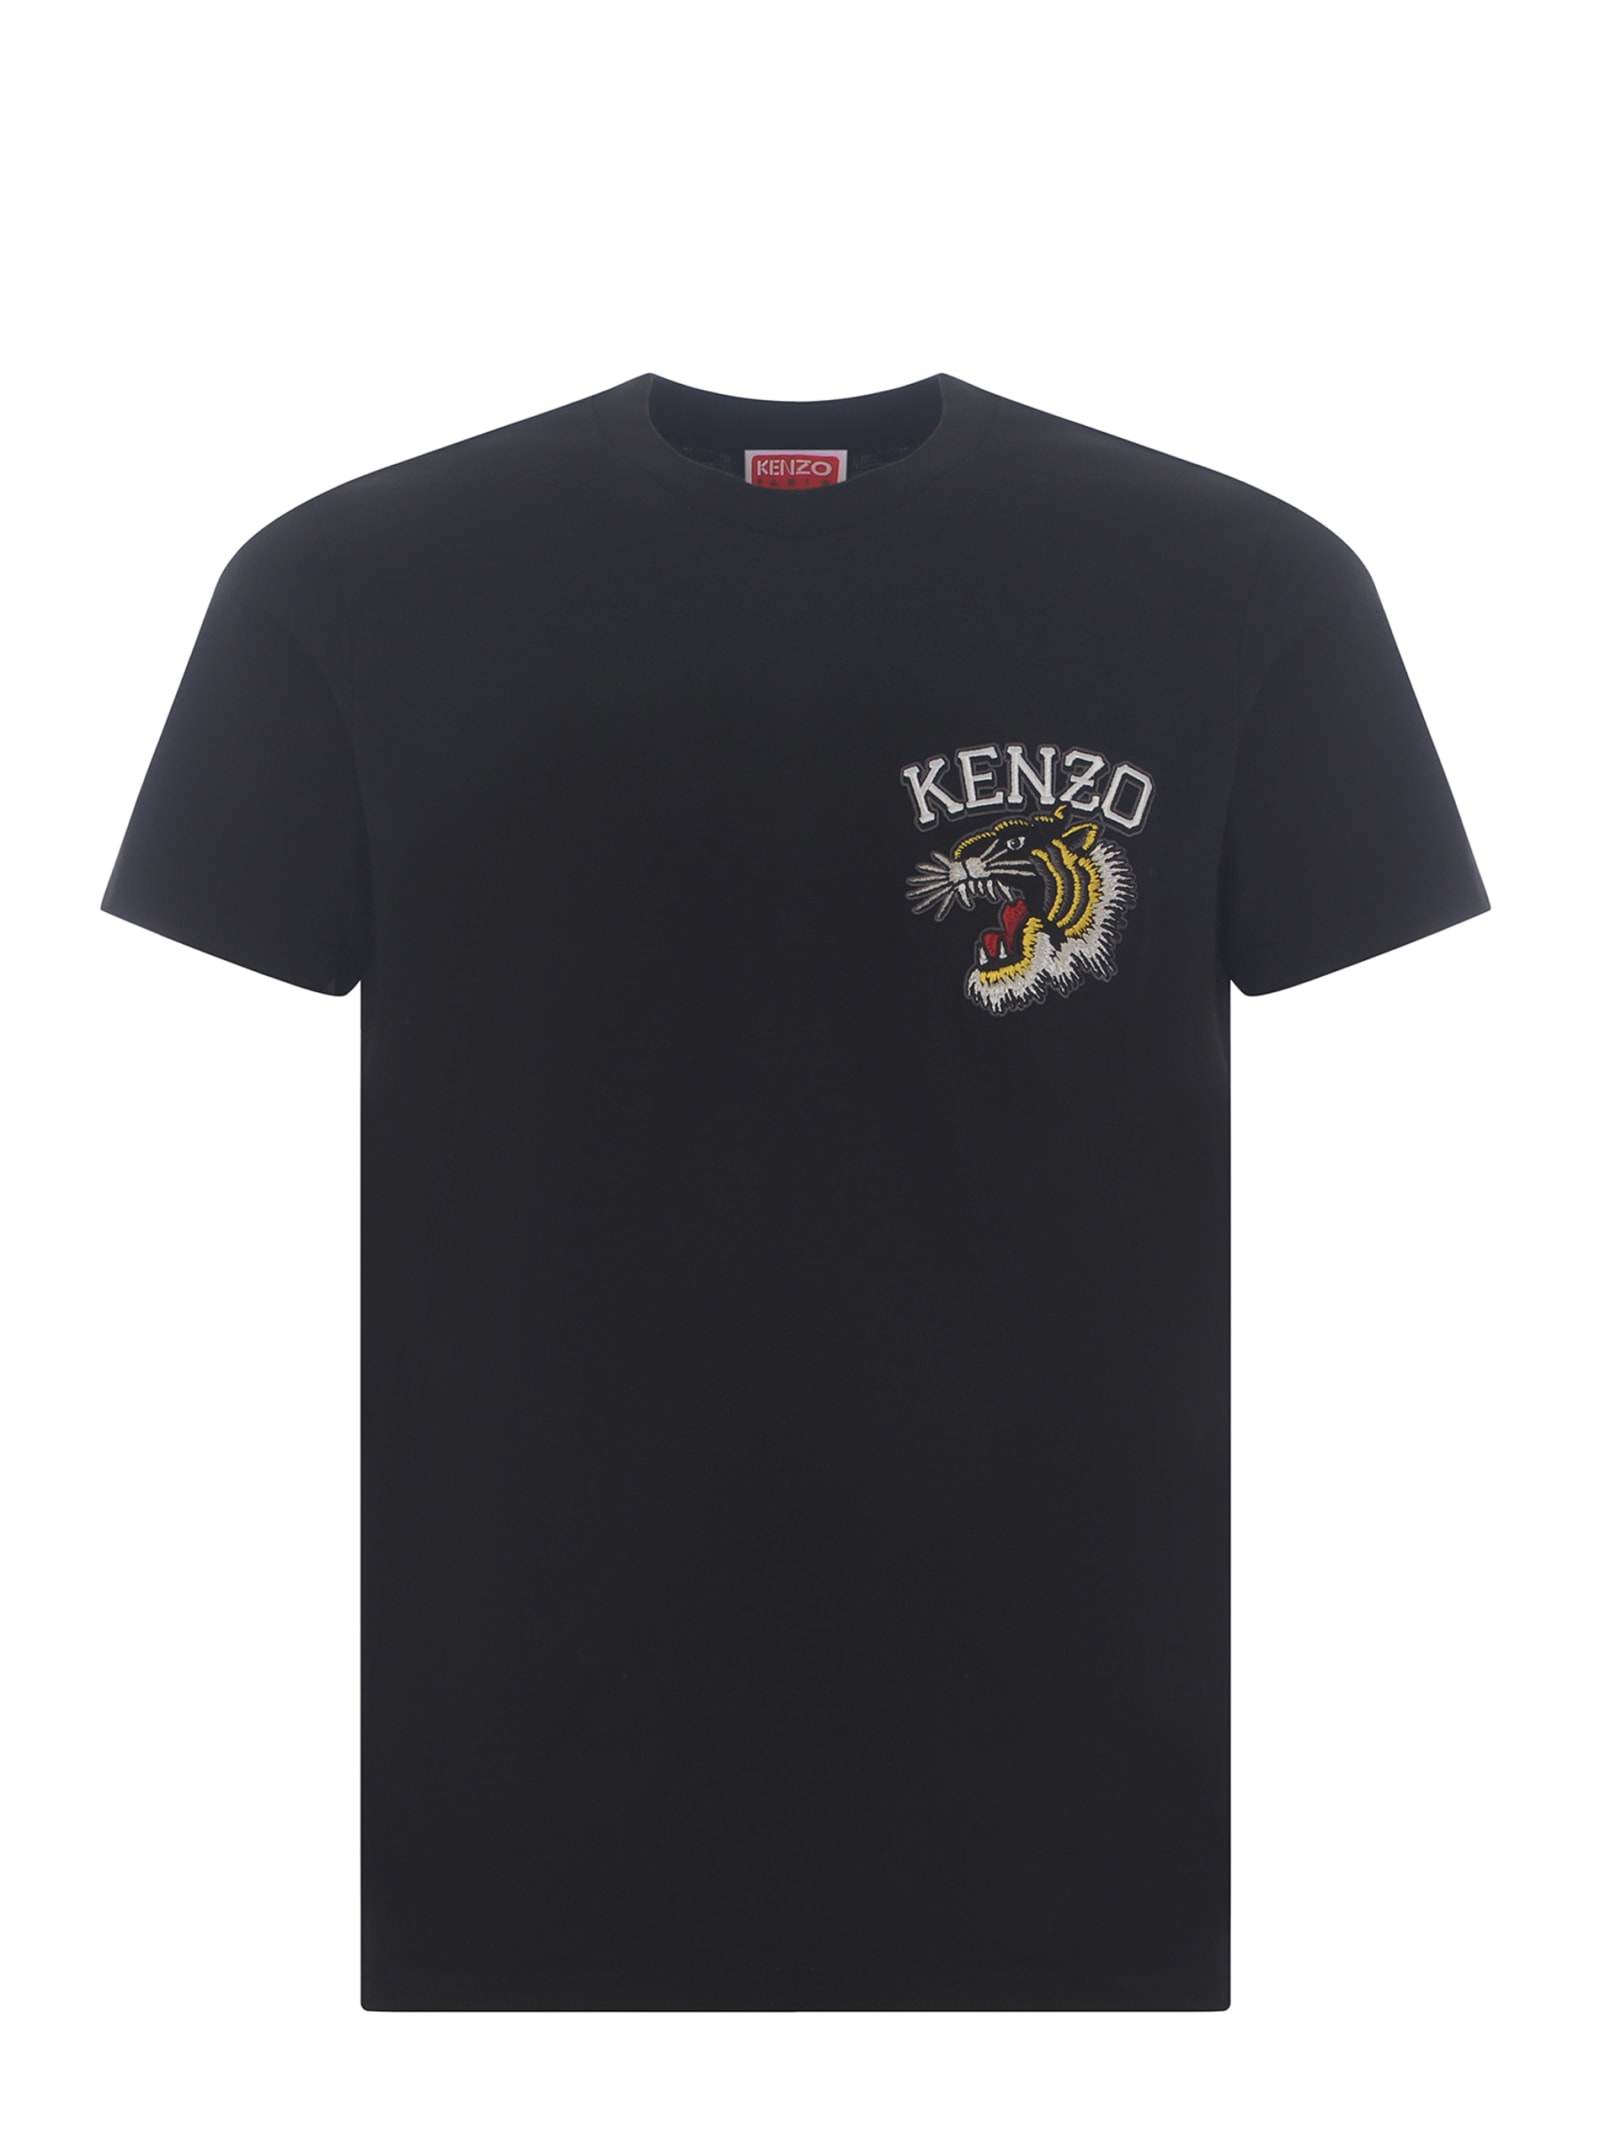 T-shirt Kenzo tiger Made Of Cotton